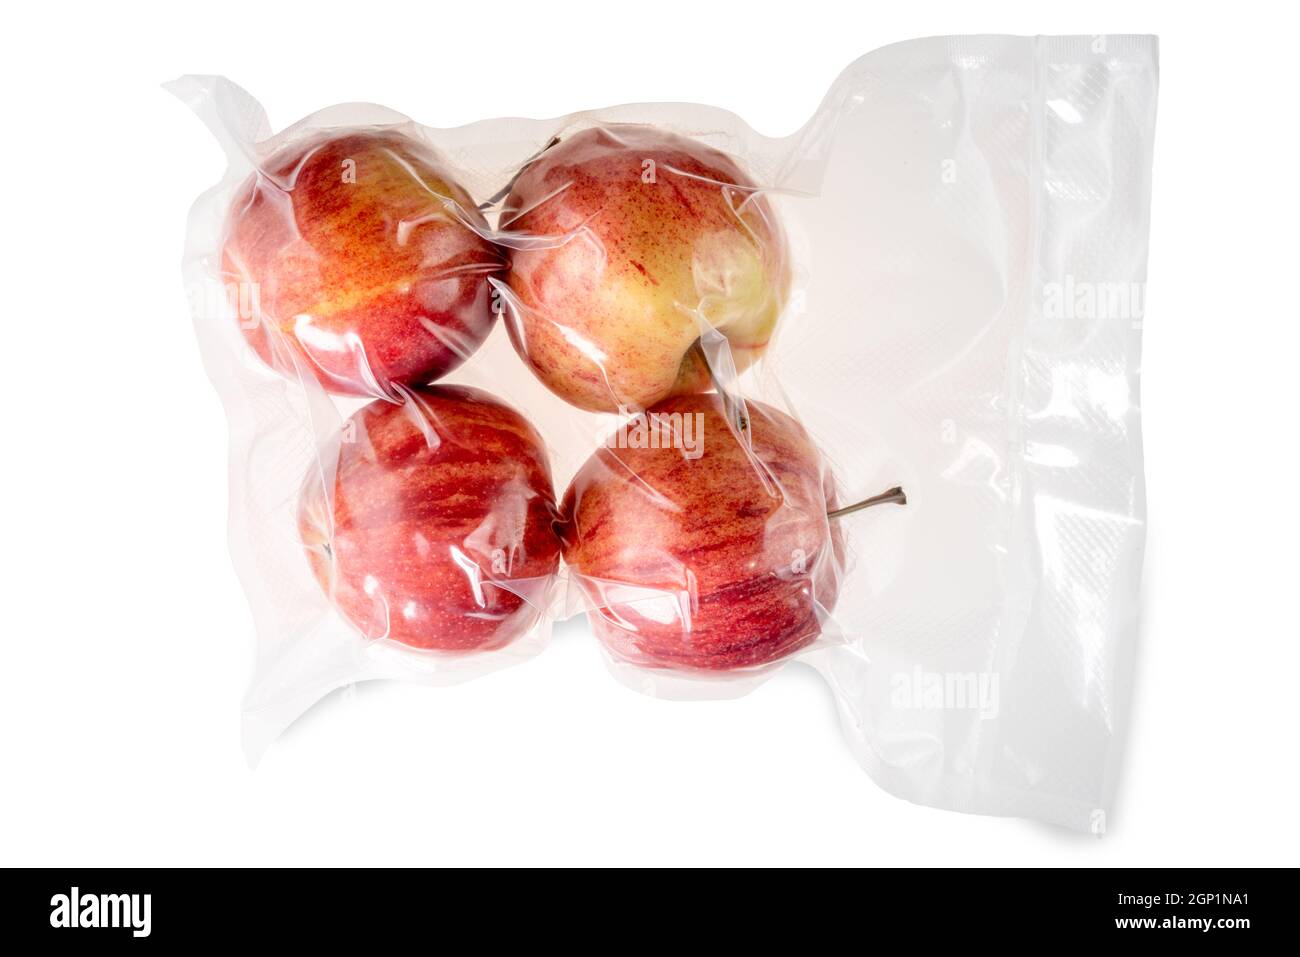 Four whole red apples in vacuum packed sealed for sous vide cooking isolated on white Stock Photo